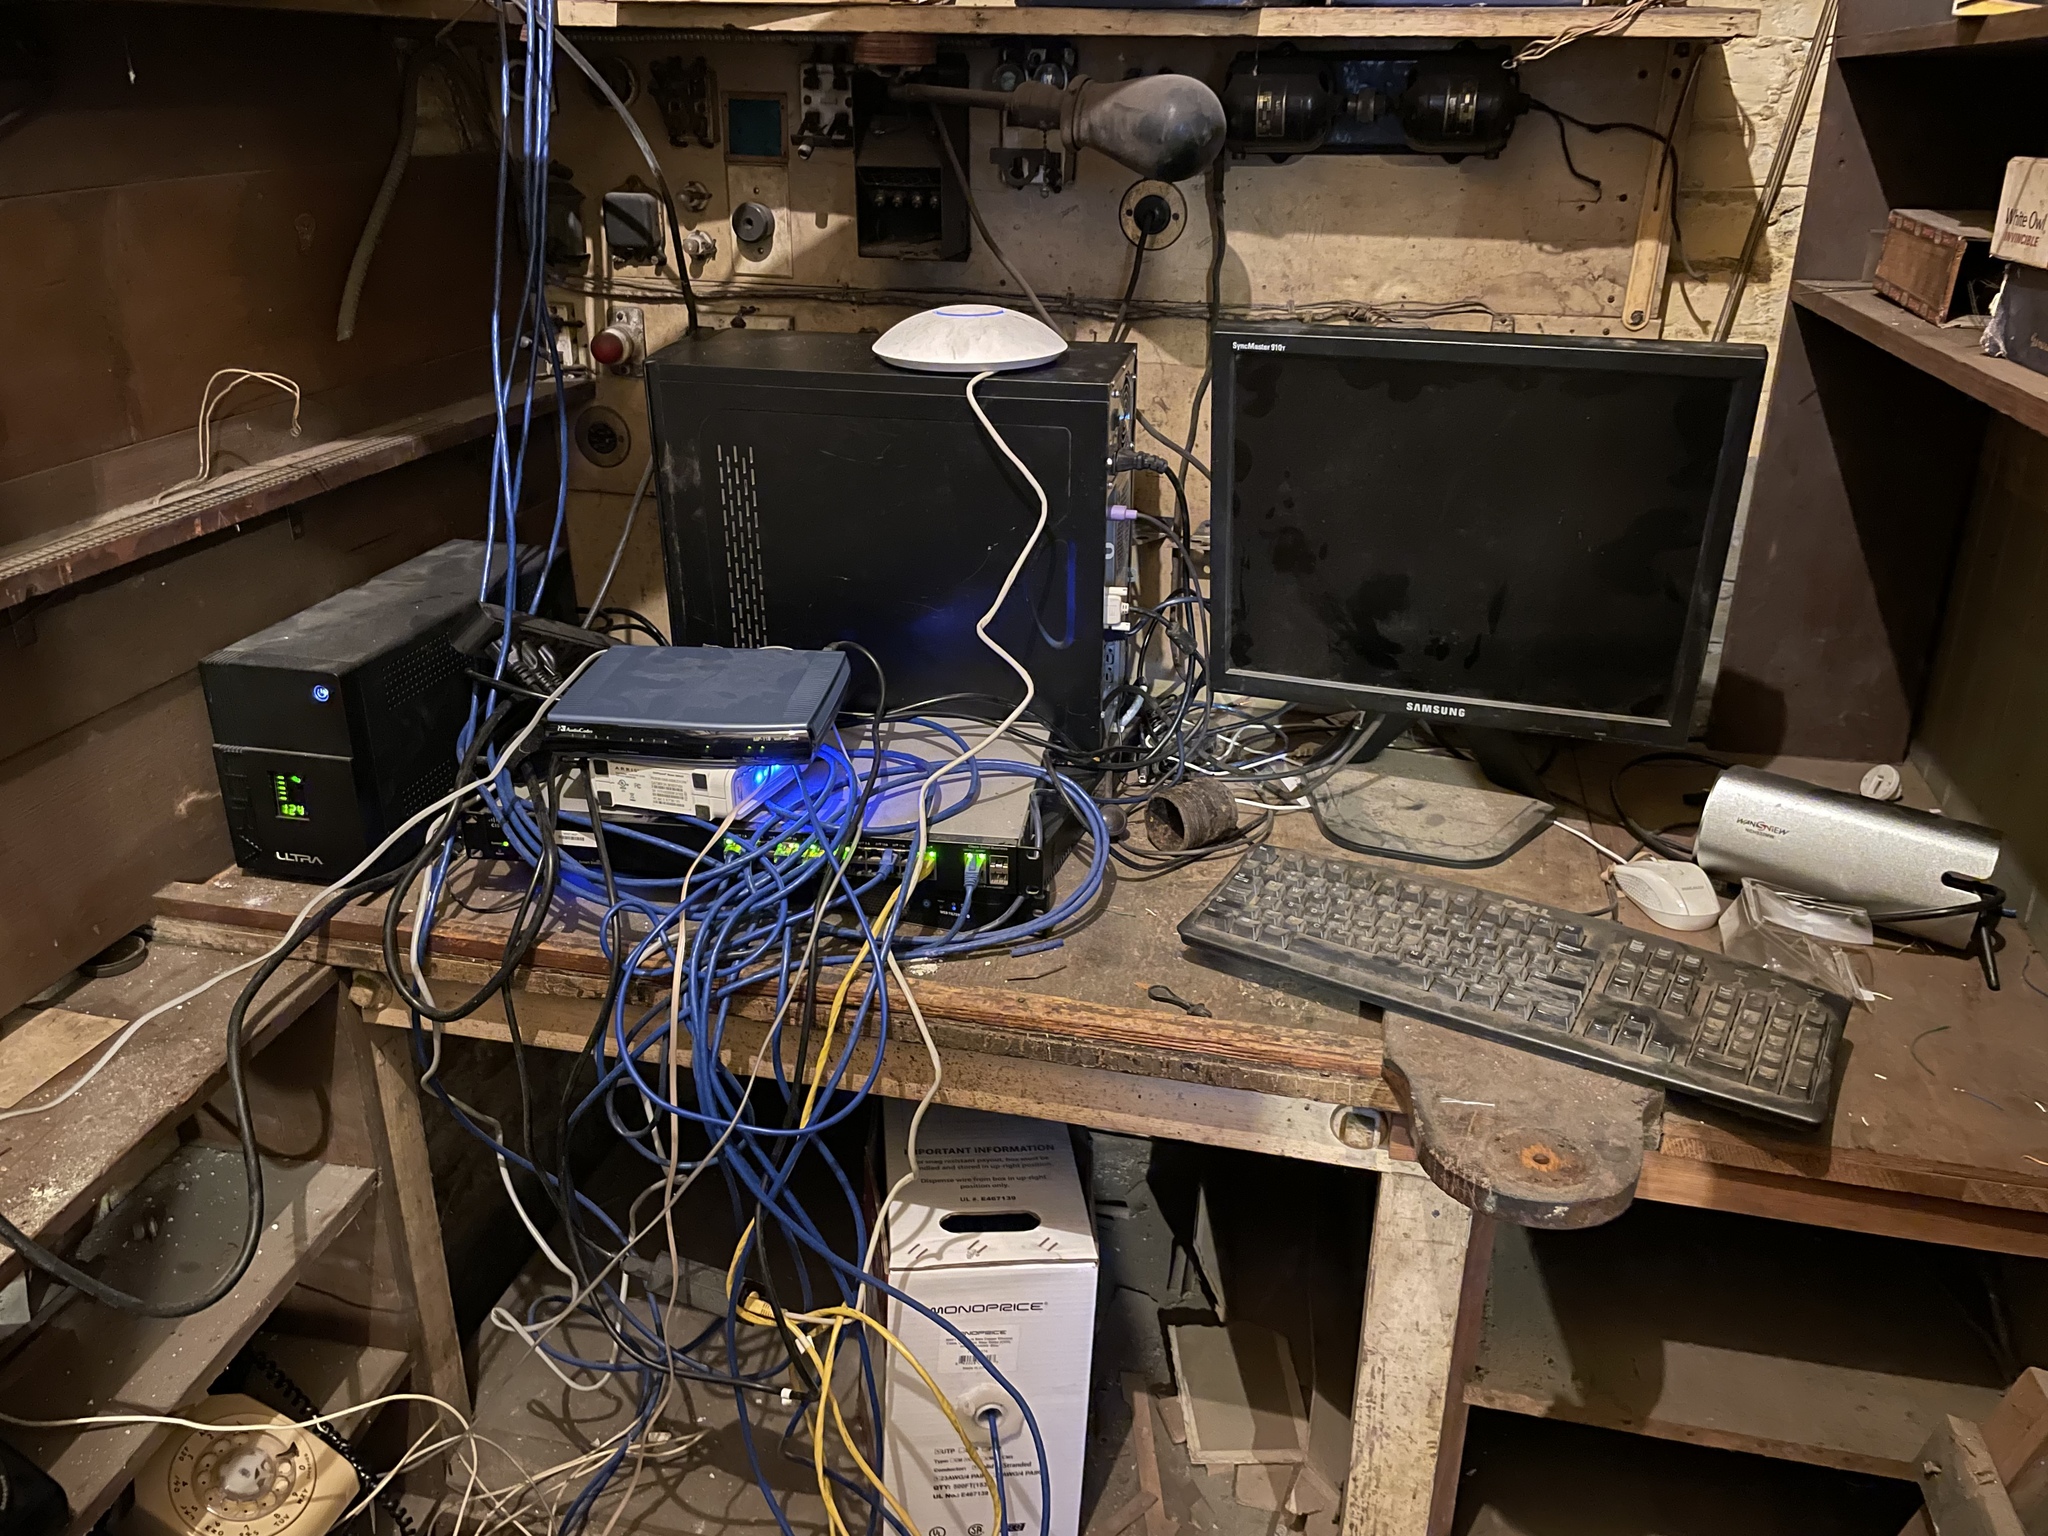 Home network and server room in a 19th century house - My, PBX, Server, Server, Victorian era, Net, Longpost